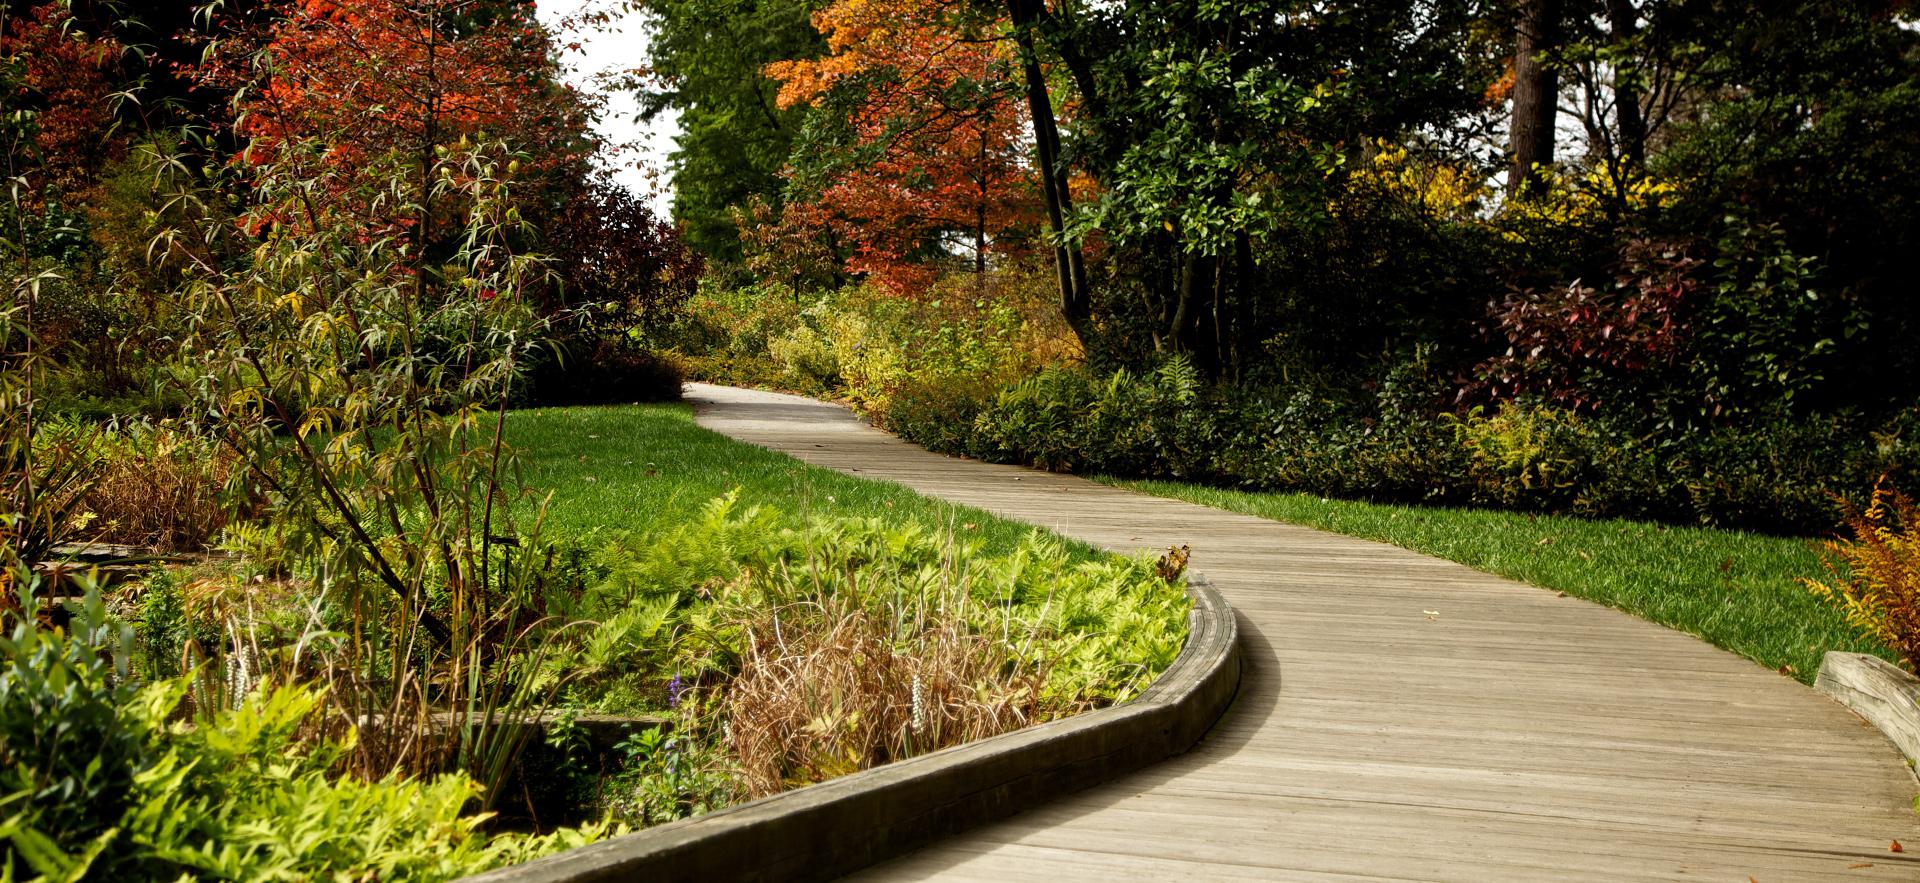 curved wooden path with green grass, plants and trees along the path